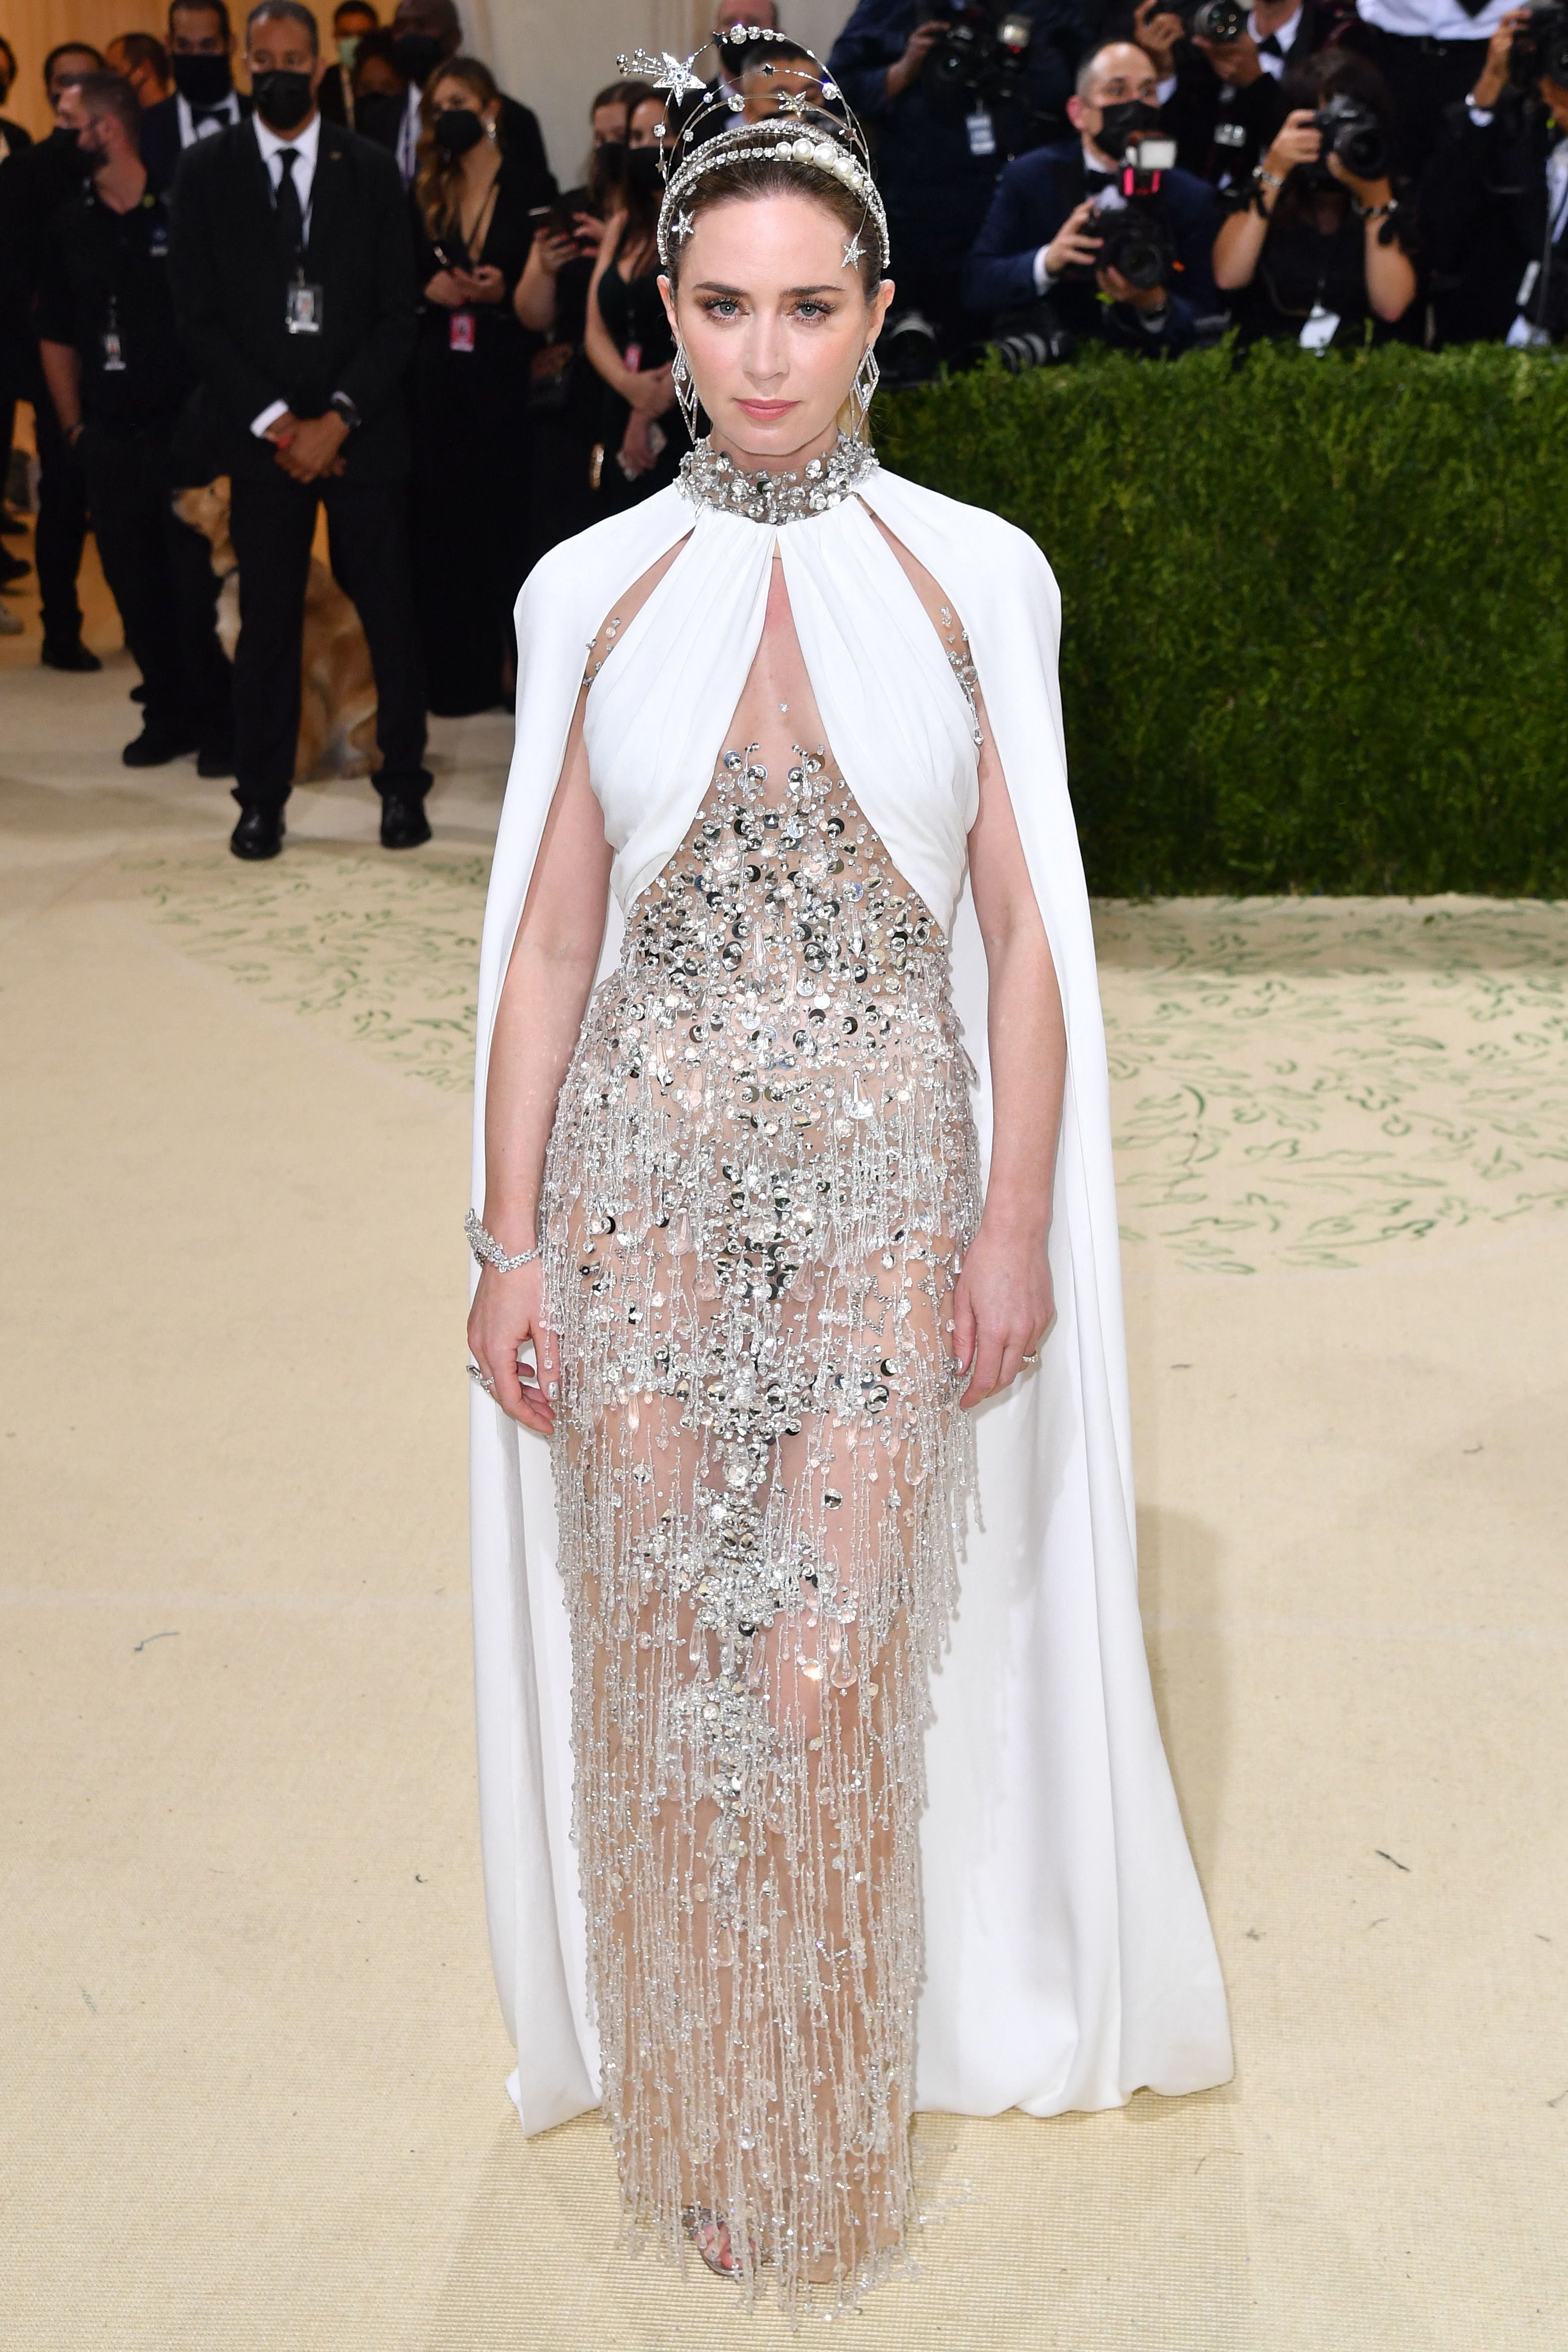 Met Gala 2021: Here are some of our favourite red carpet fashion looks